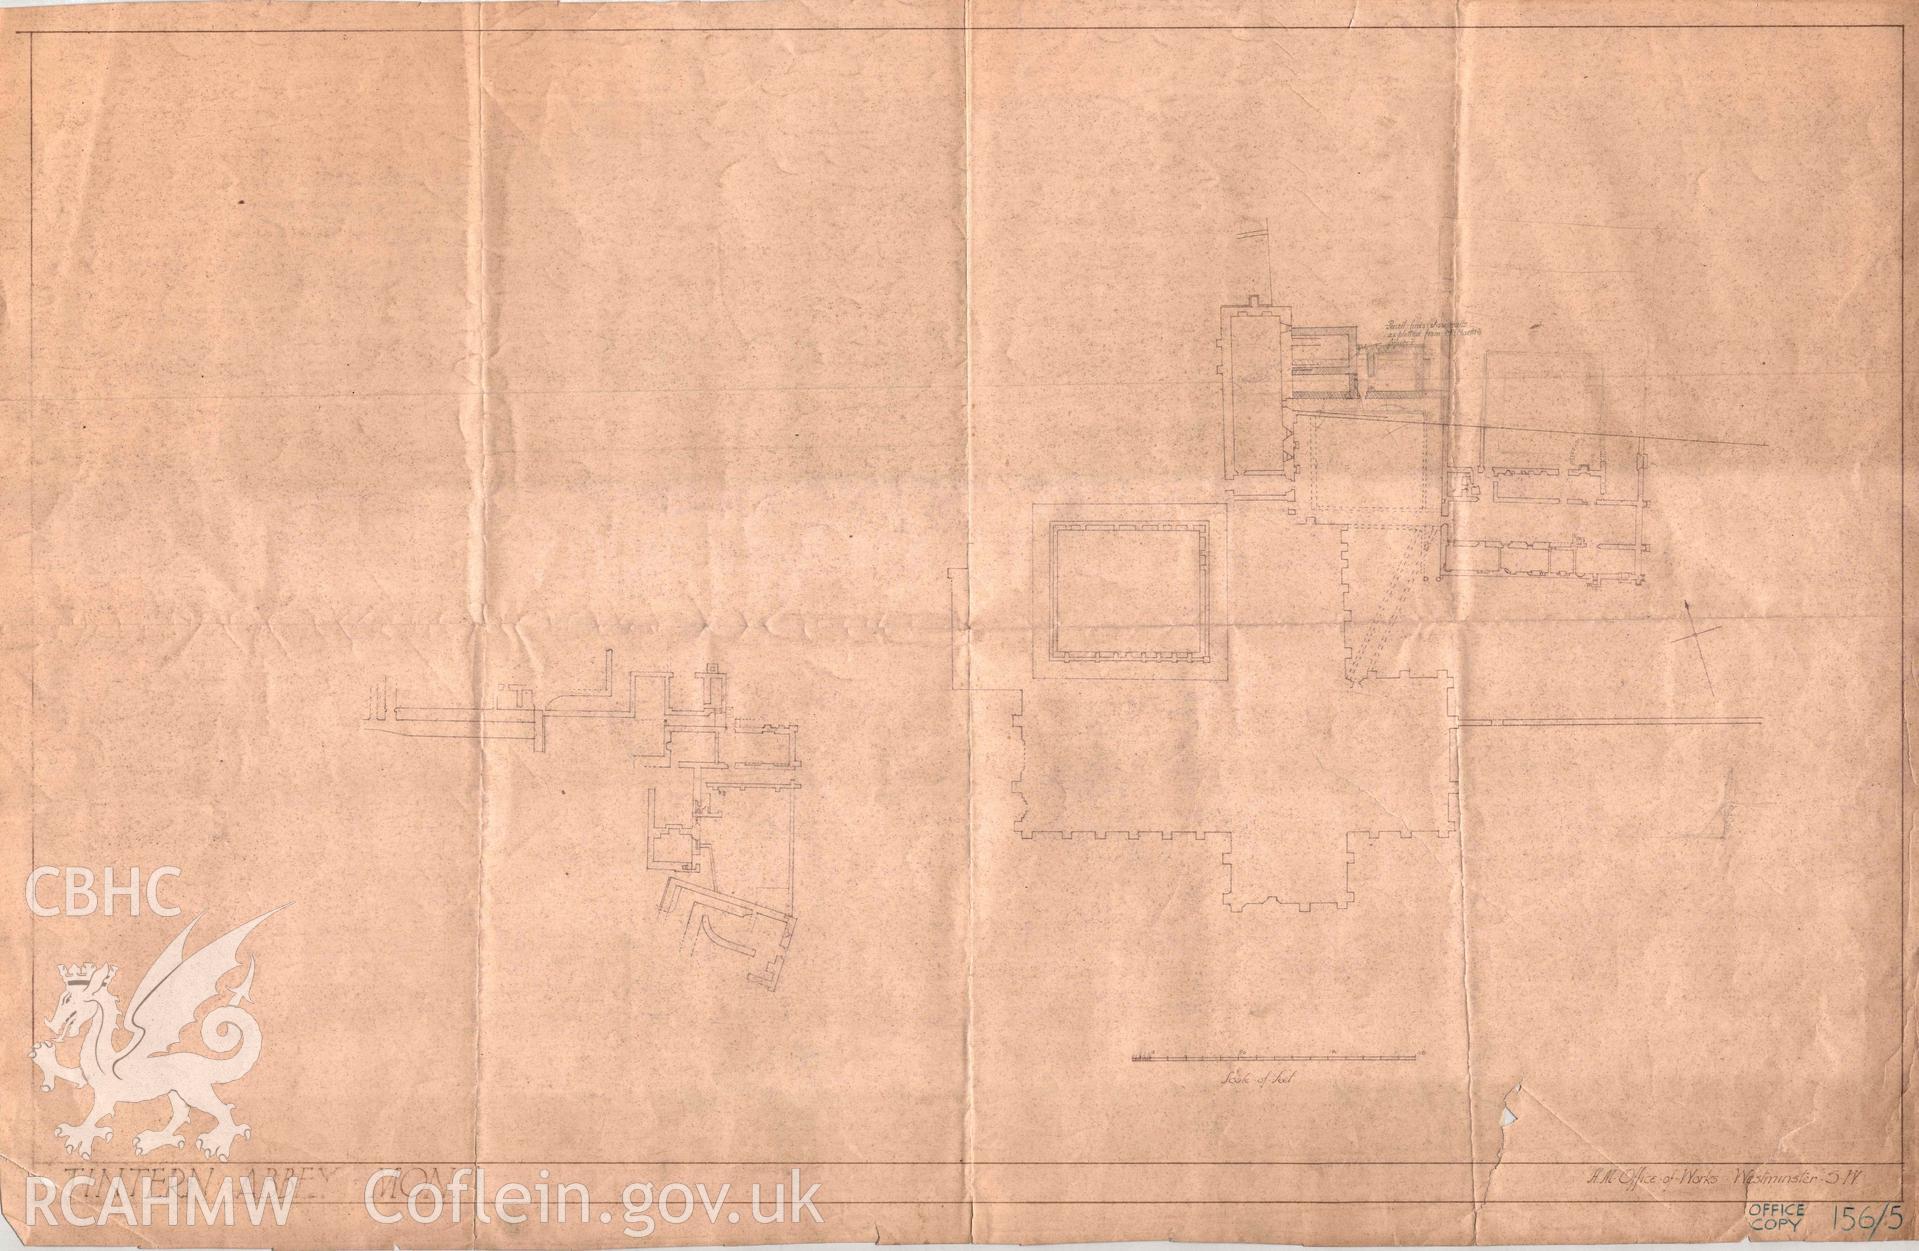 Cadw guardianship monument drawing, ground plan of abbey, Tintern Abbey.  Undated